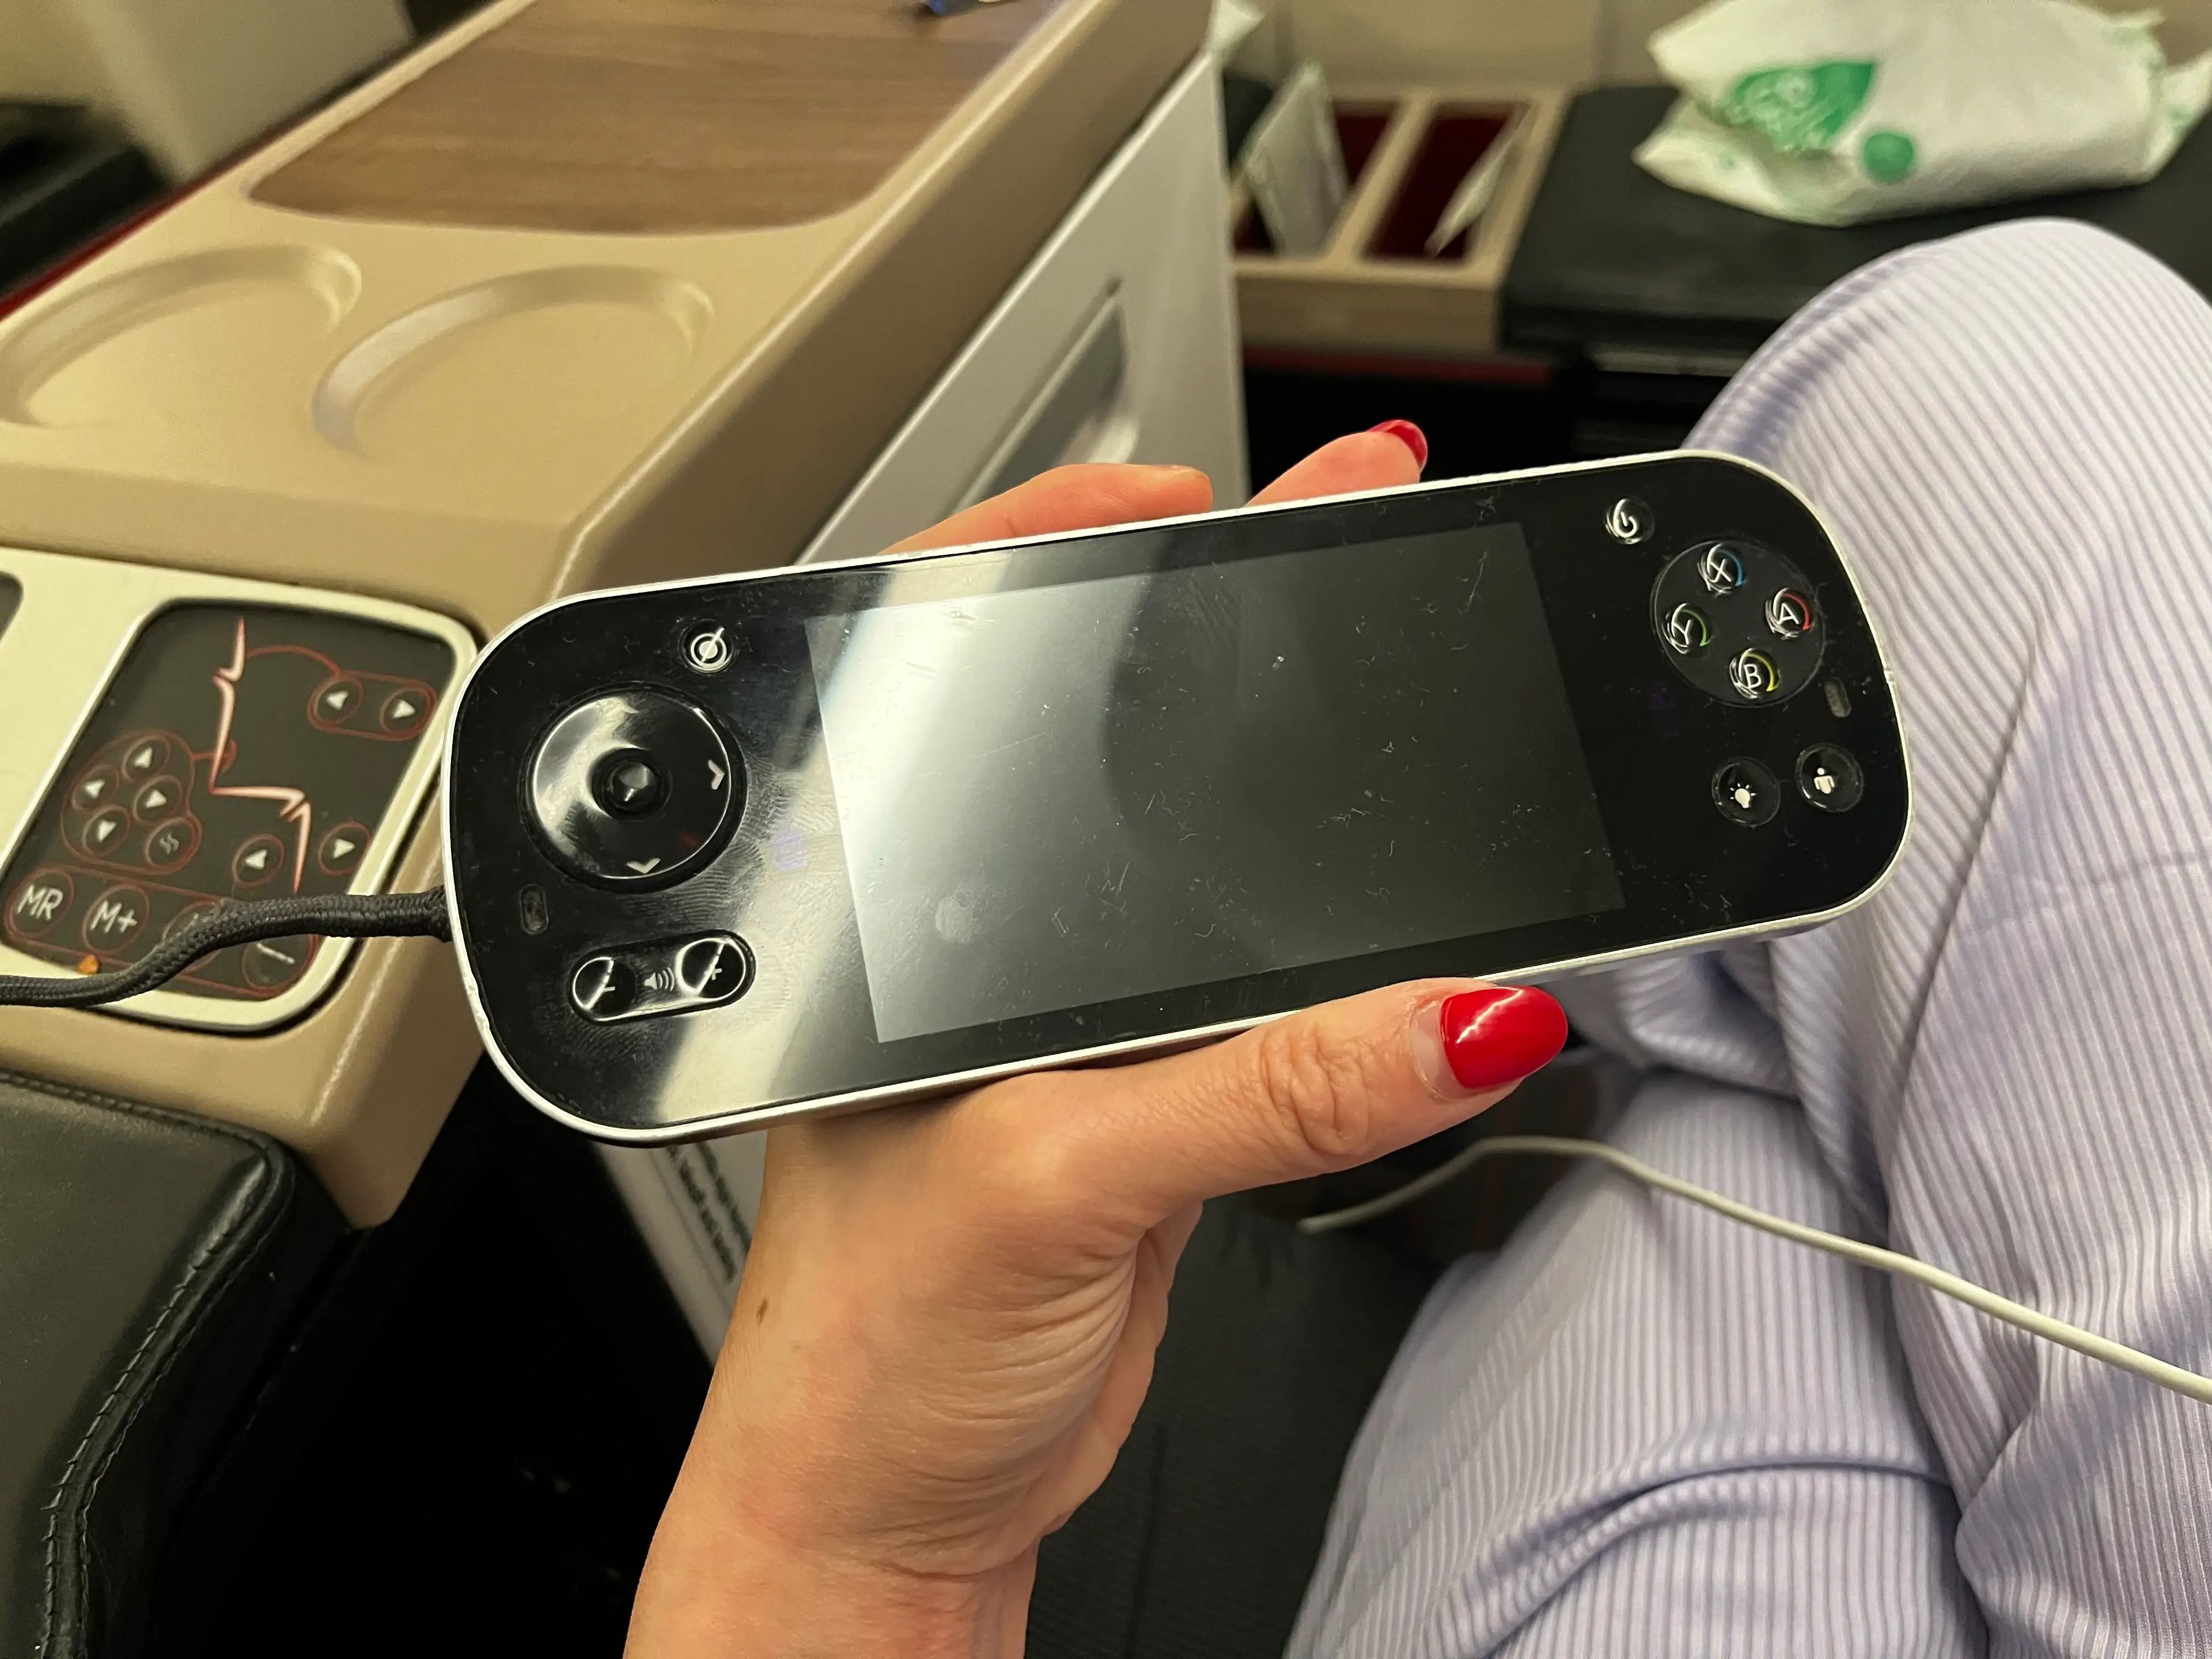 A hand holds a black game controller on a Turkish Airlines flight